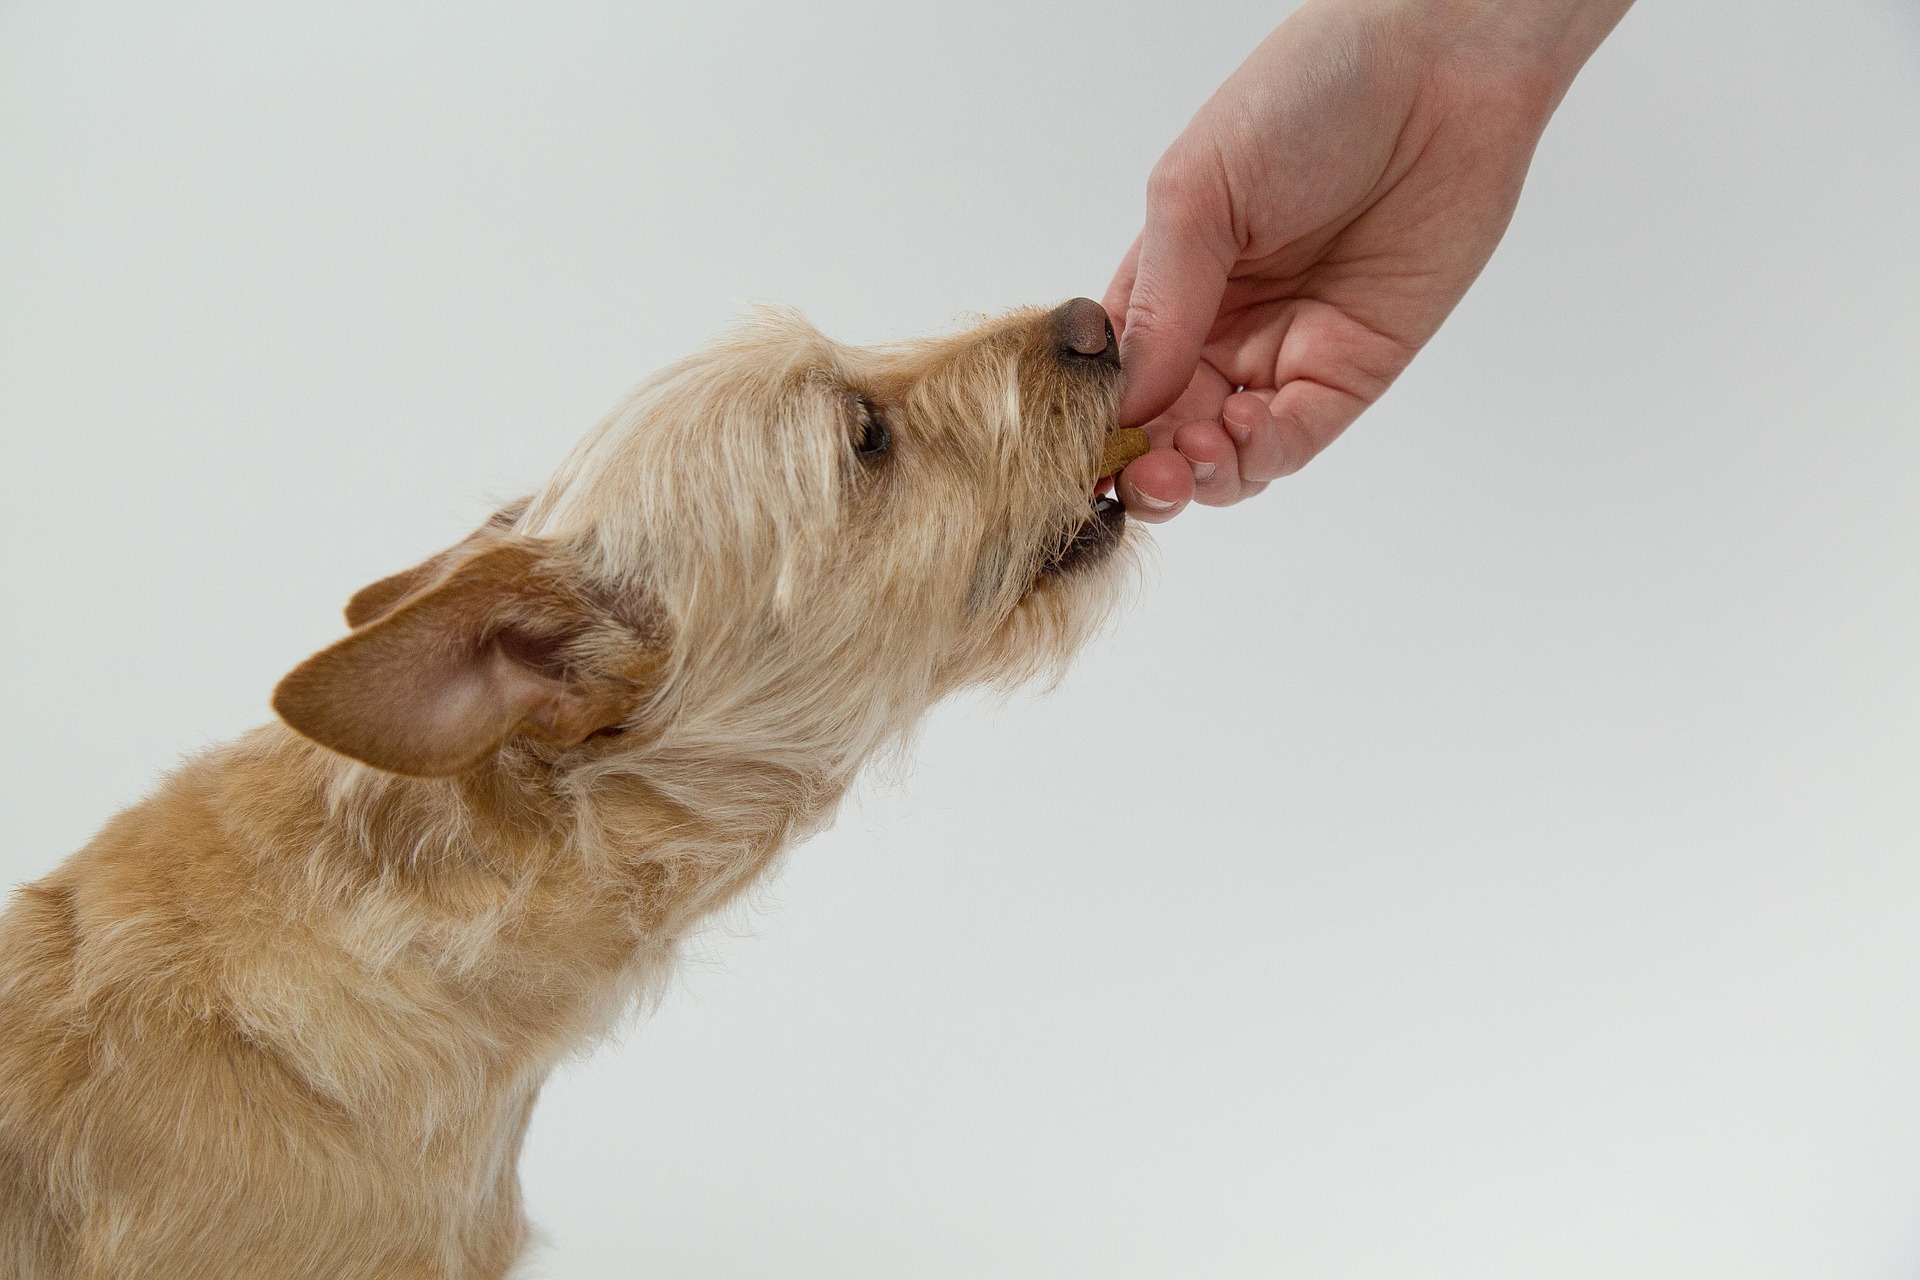 Protecting your pet from heartworms can be easy!